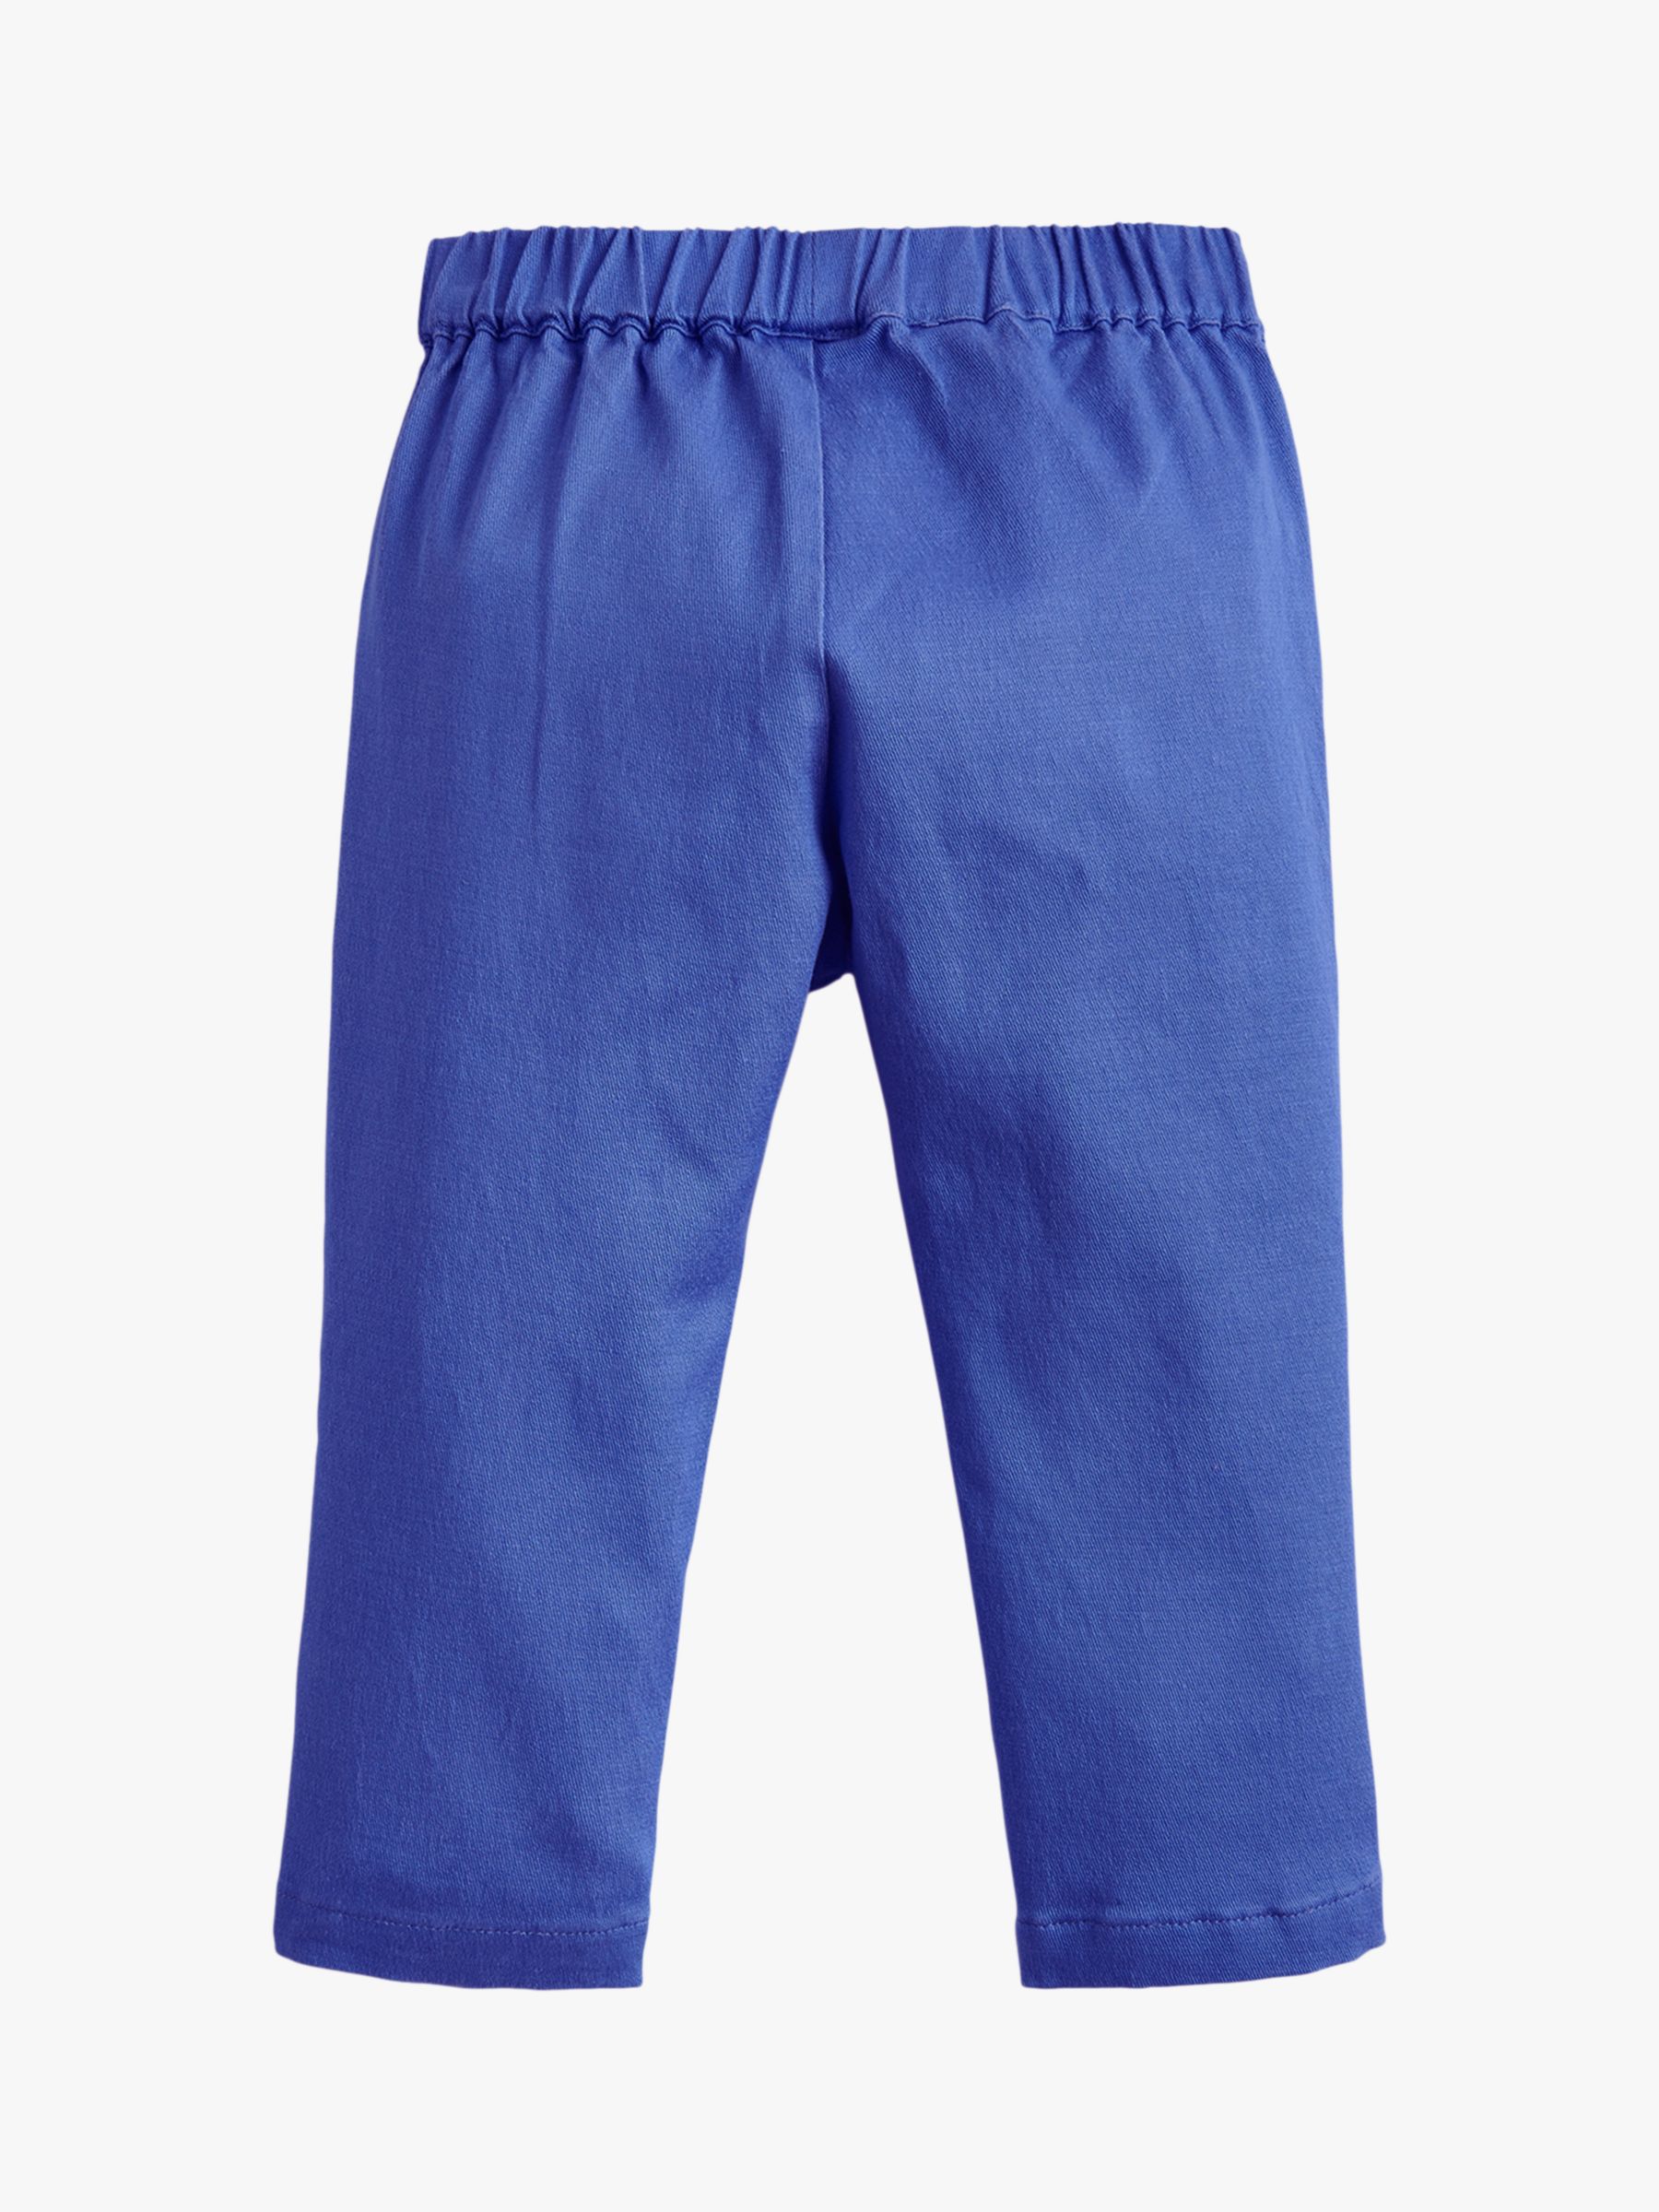 Baby Joule Ethan Trousers, Blue